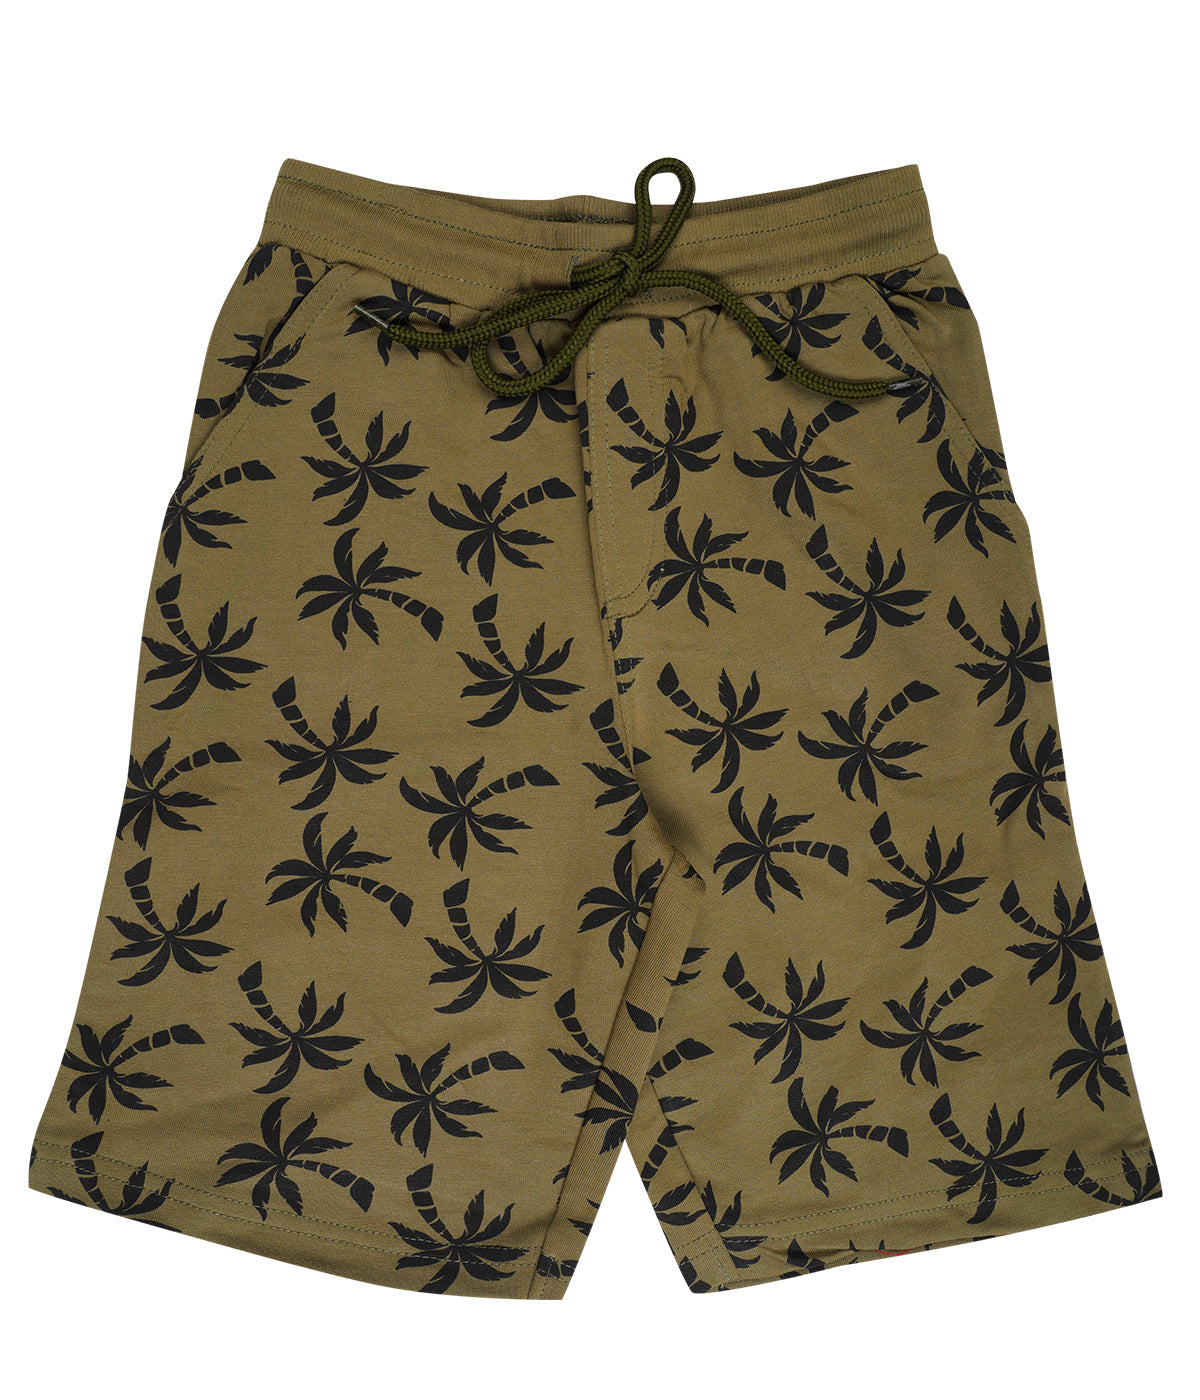 Yalzz Short For Boys Casual Printed Pure Cotton